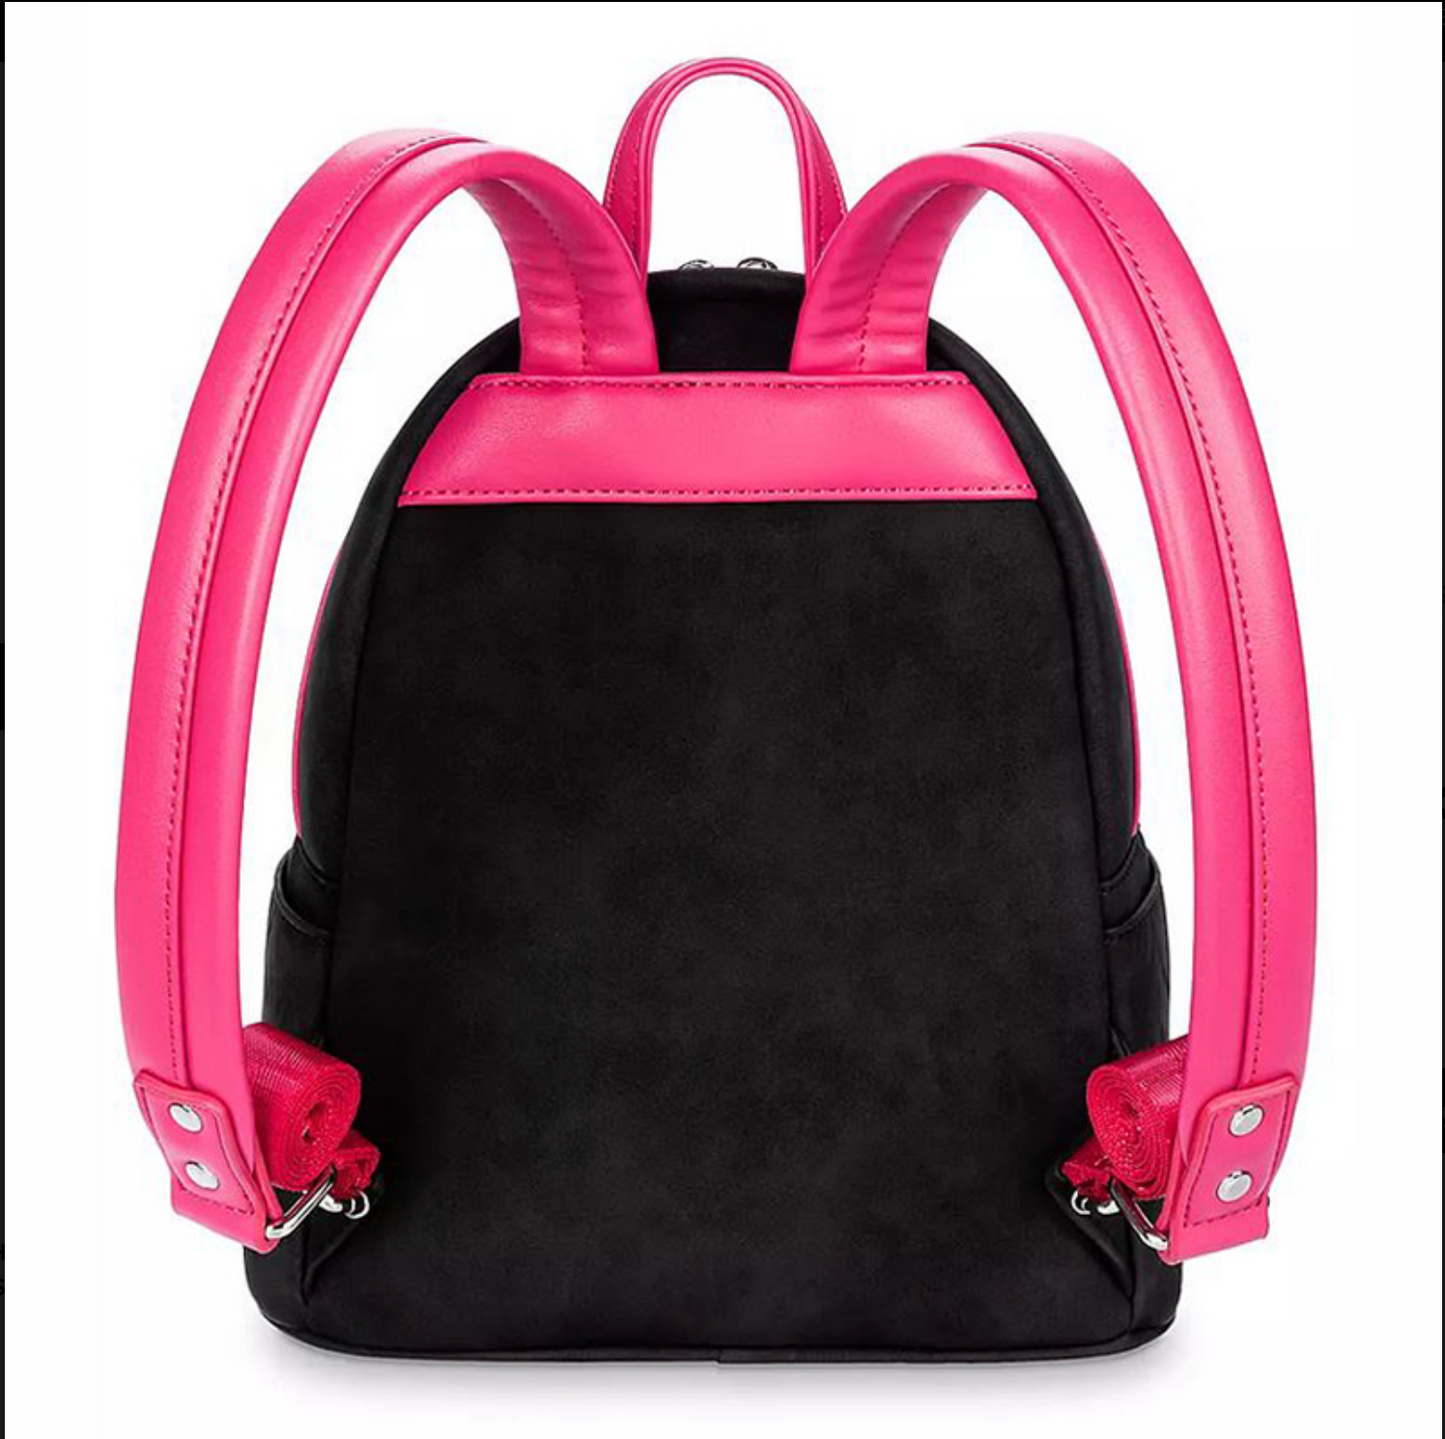 EDNA MODE COSPLAY DISNEY PARKS EXCLUSIVE LOUNGEFLY MINI BACKPACK